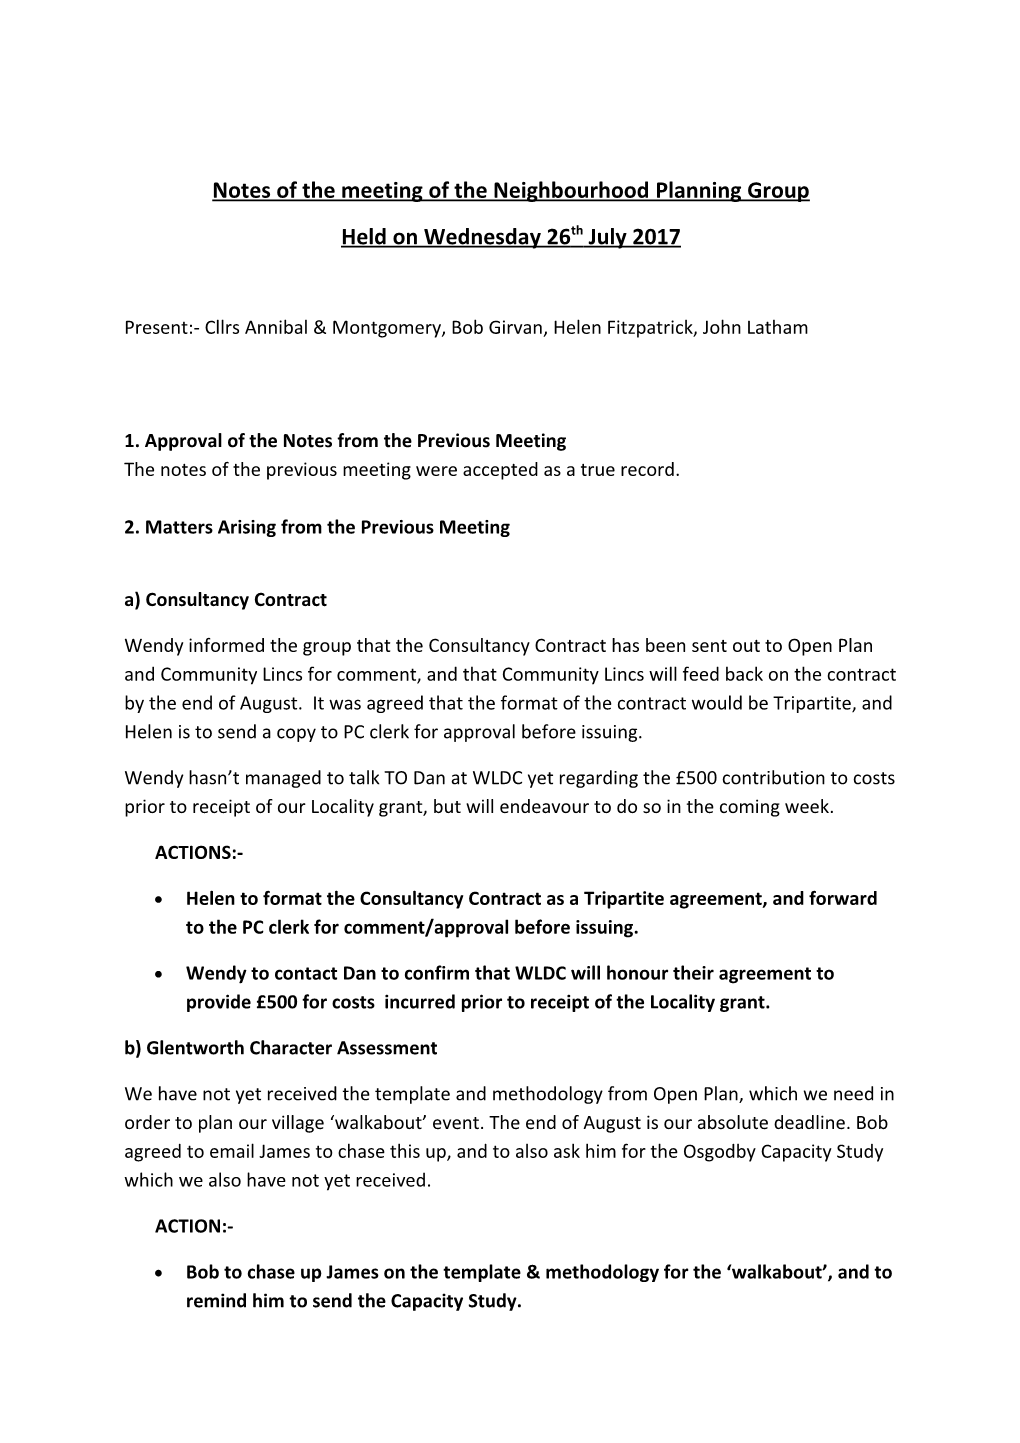 Notes of the Meeting of the Neighbourhood Planning Group